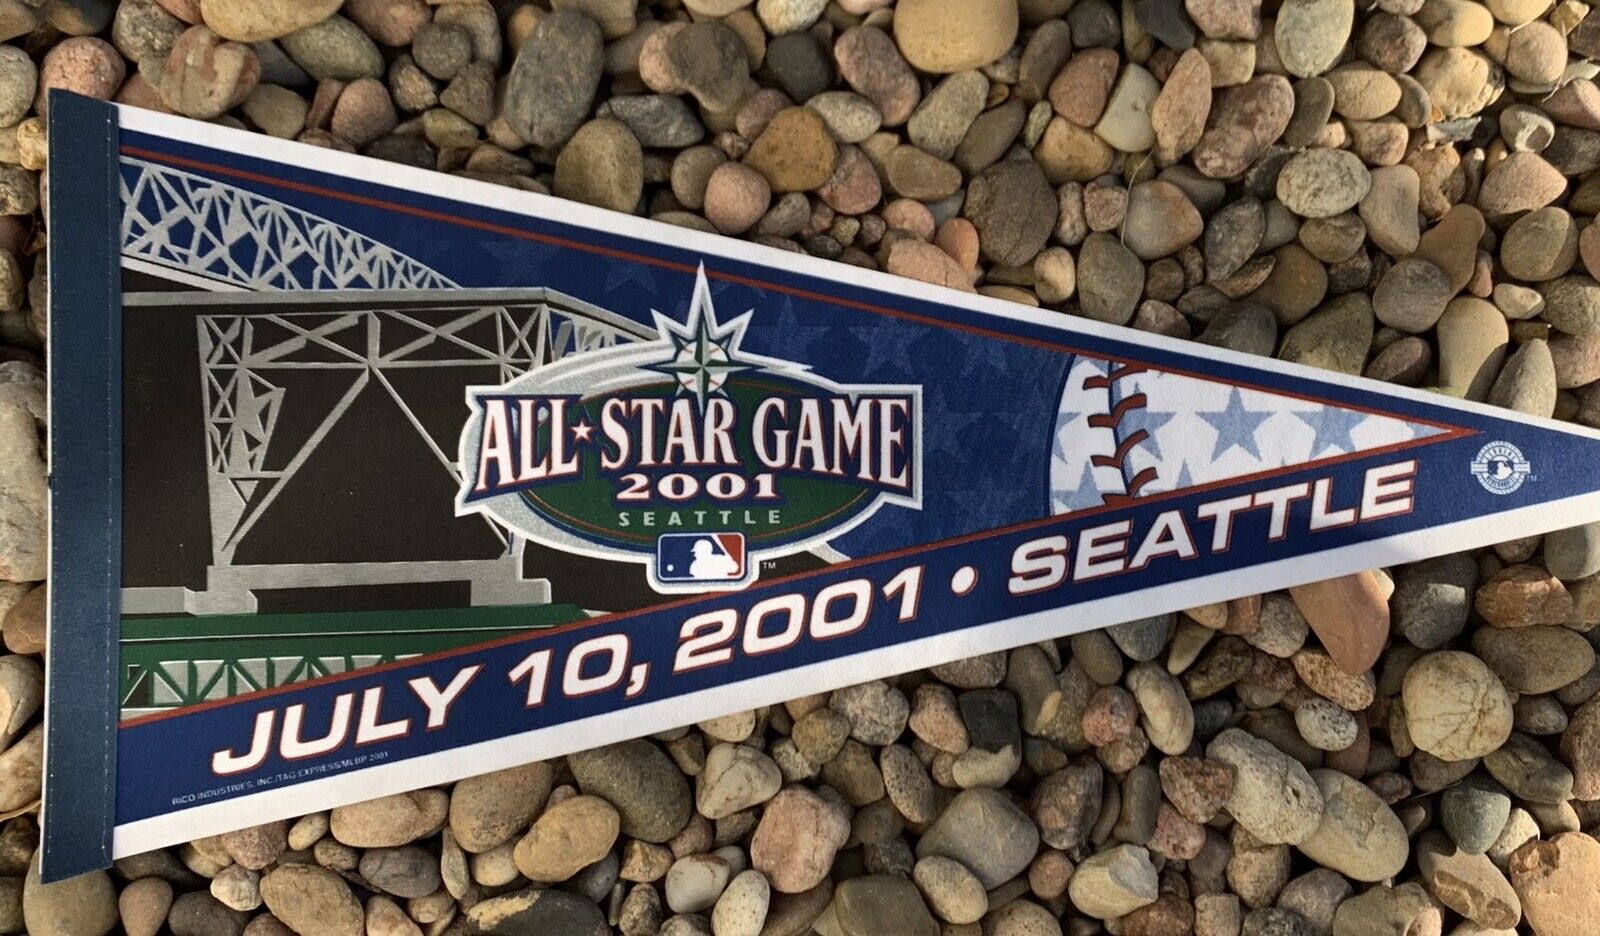 MLB 2001 All Star Game Pennant. Seattle Mariners. Good Condition